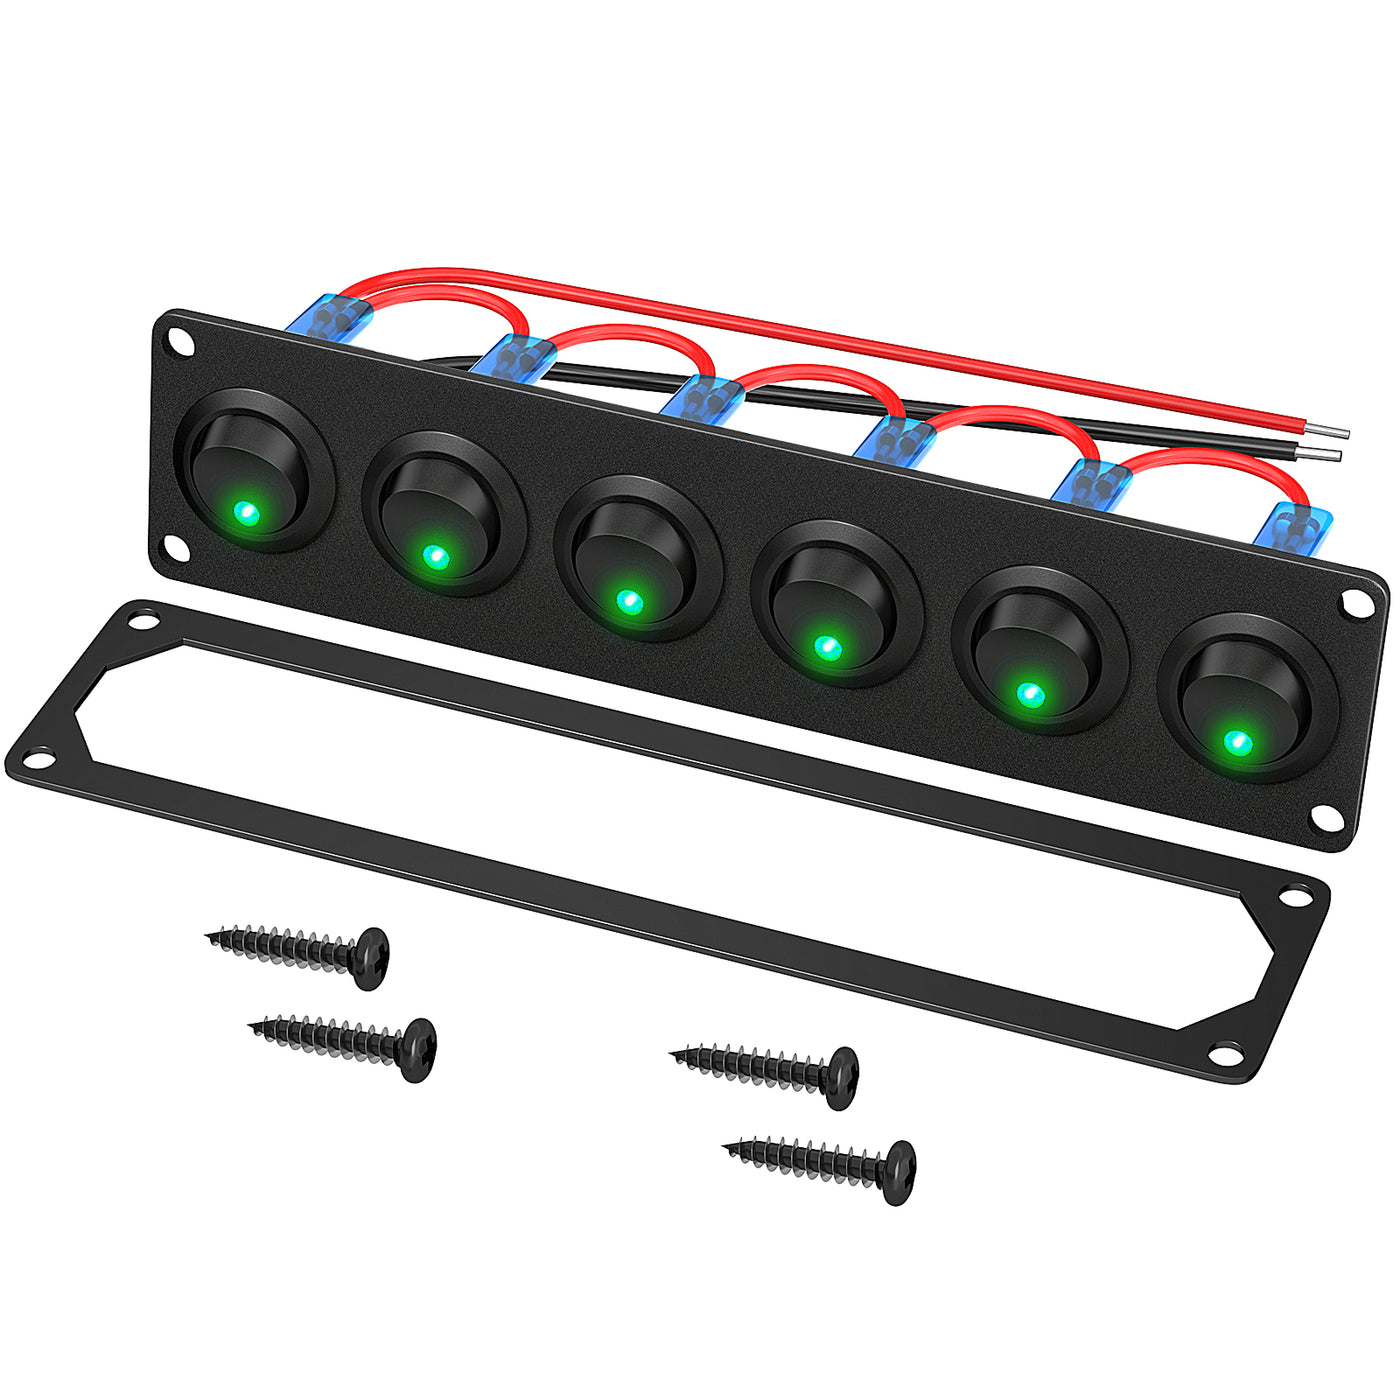 PN-R6-101EN-G 6 Gang Round Rocker Switch Panel with Green LED